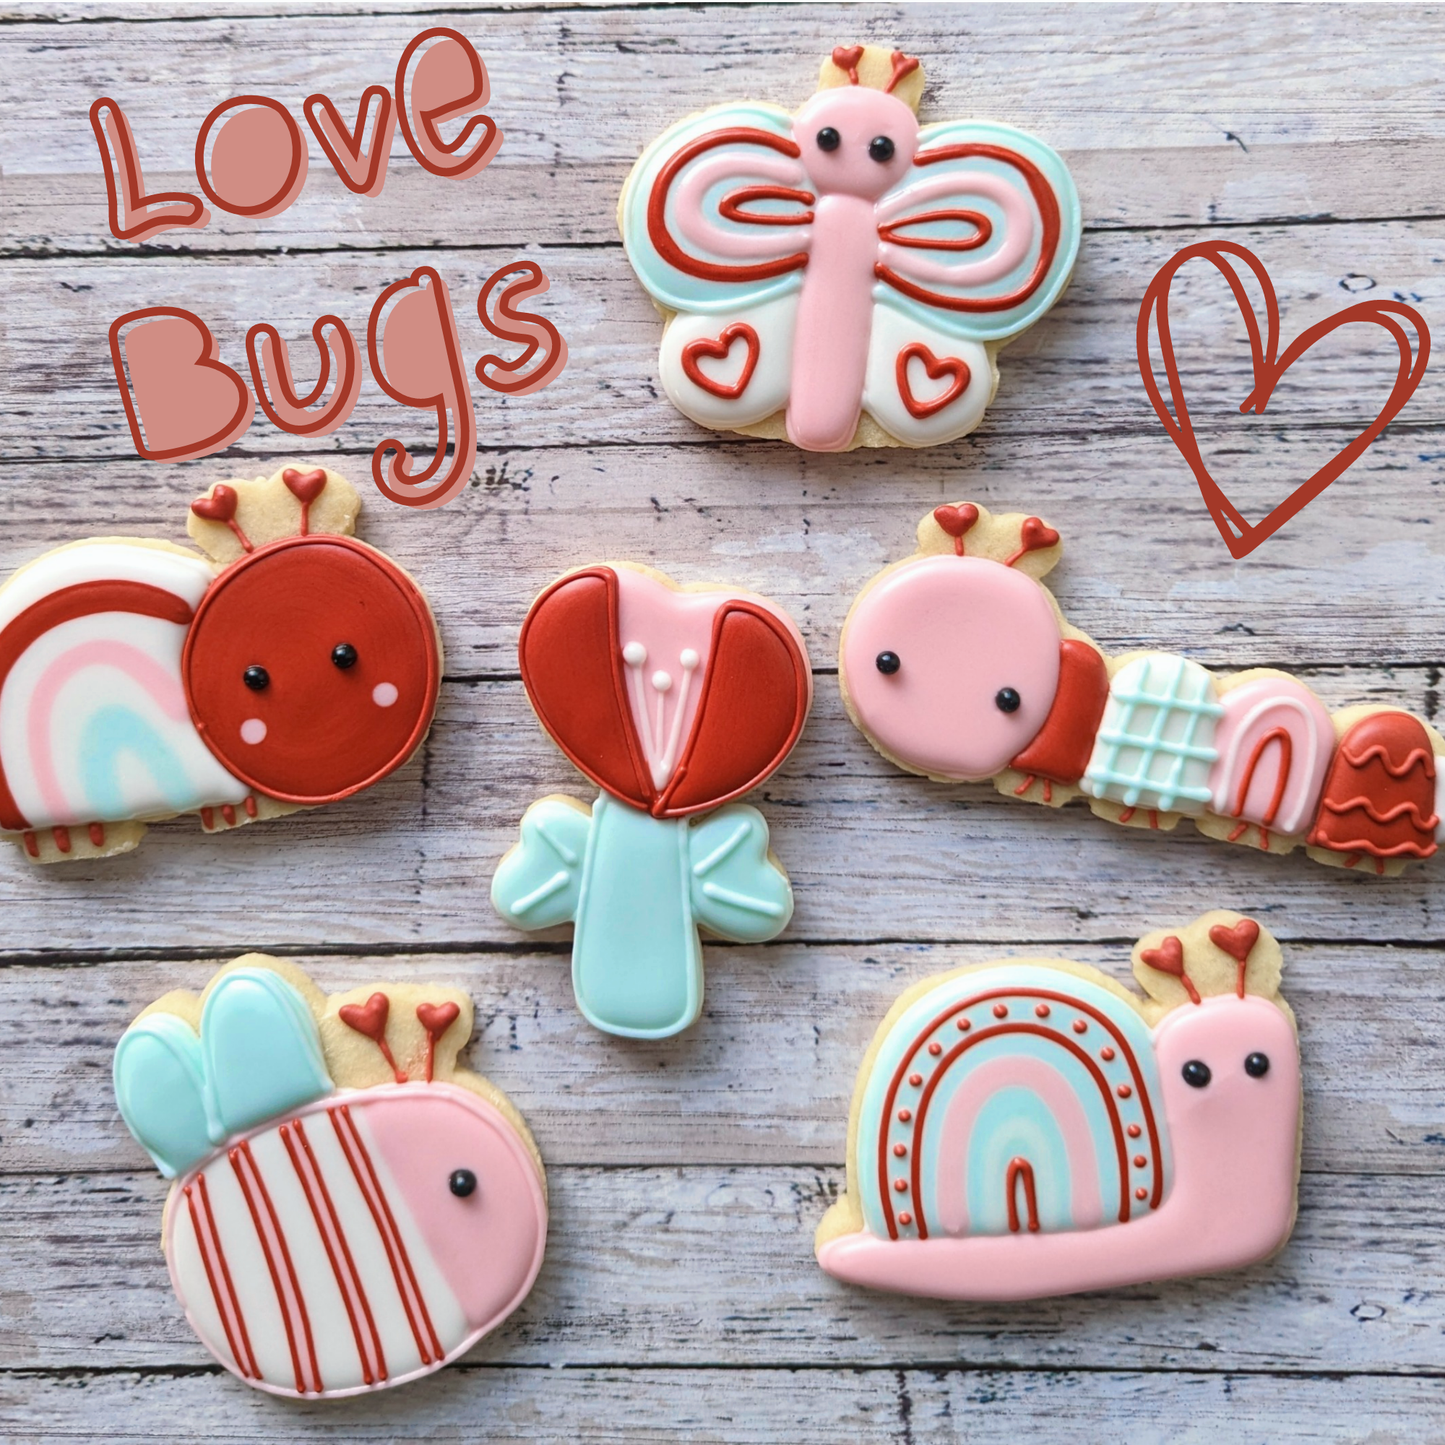 SOLD OUT Royal Icing Cookie Decorating Class - Valentine Love Bugs